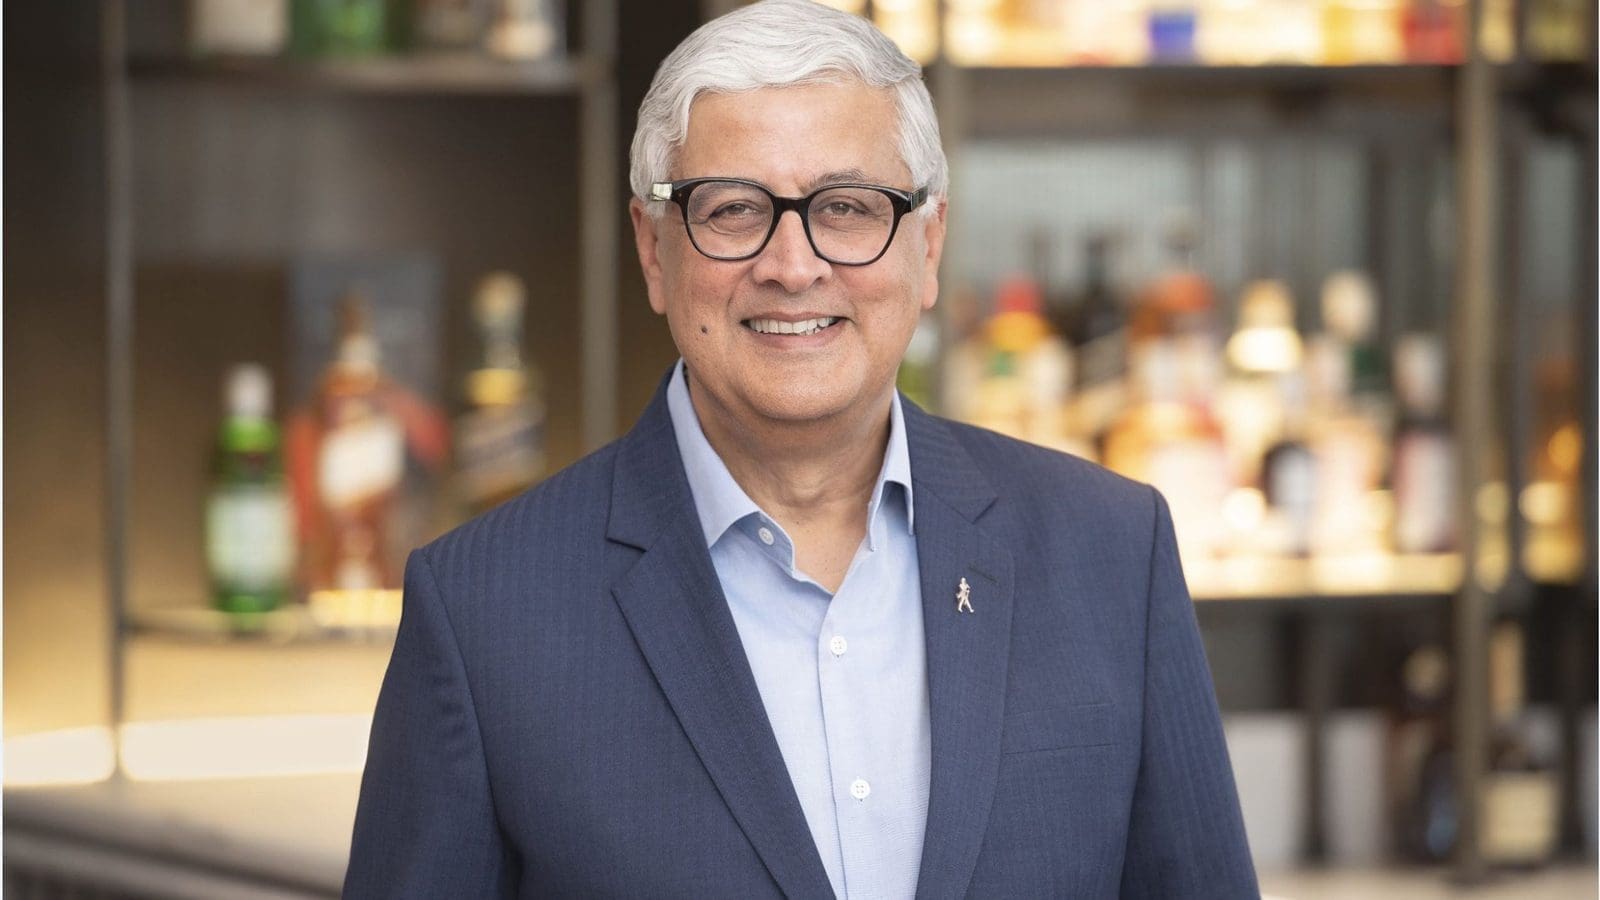 Diageo’s long-serving CEO Sir Ivan Menezes dies at age 63 after short-illness